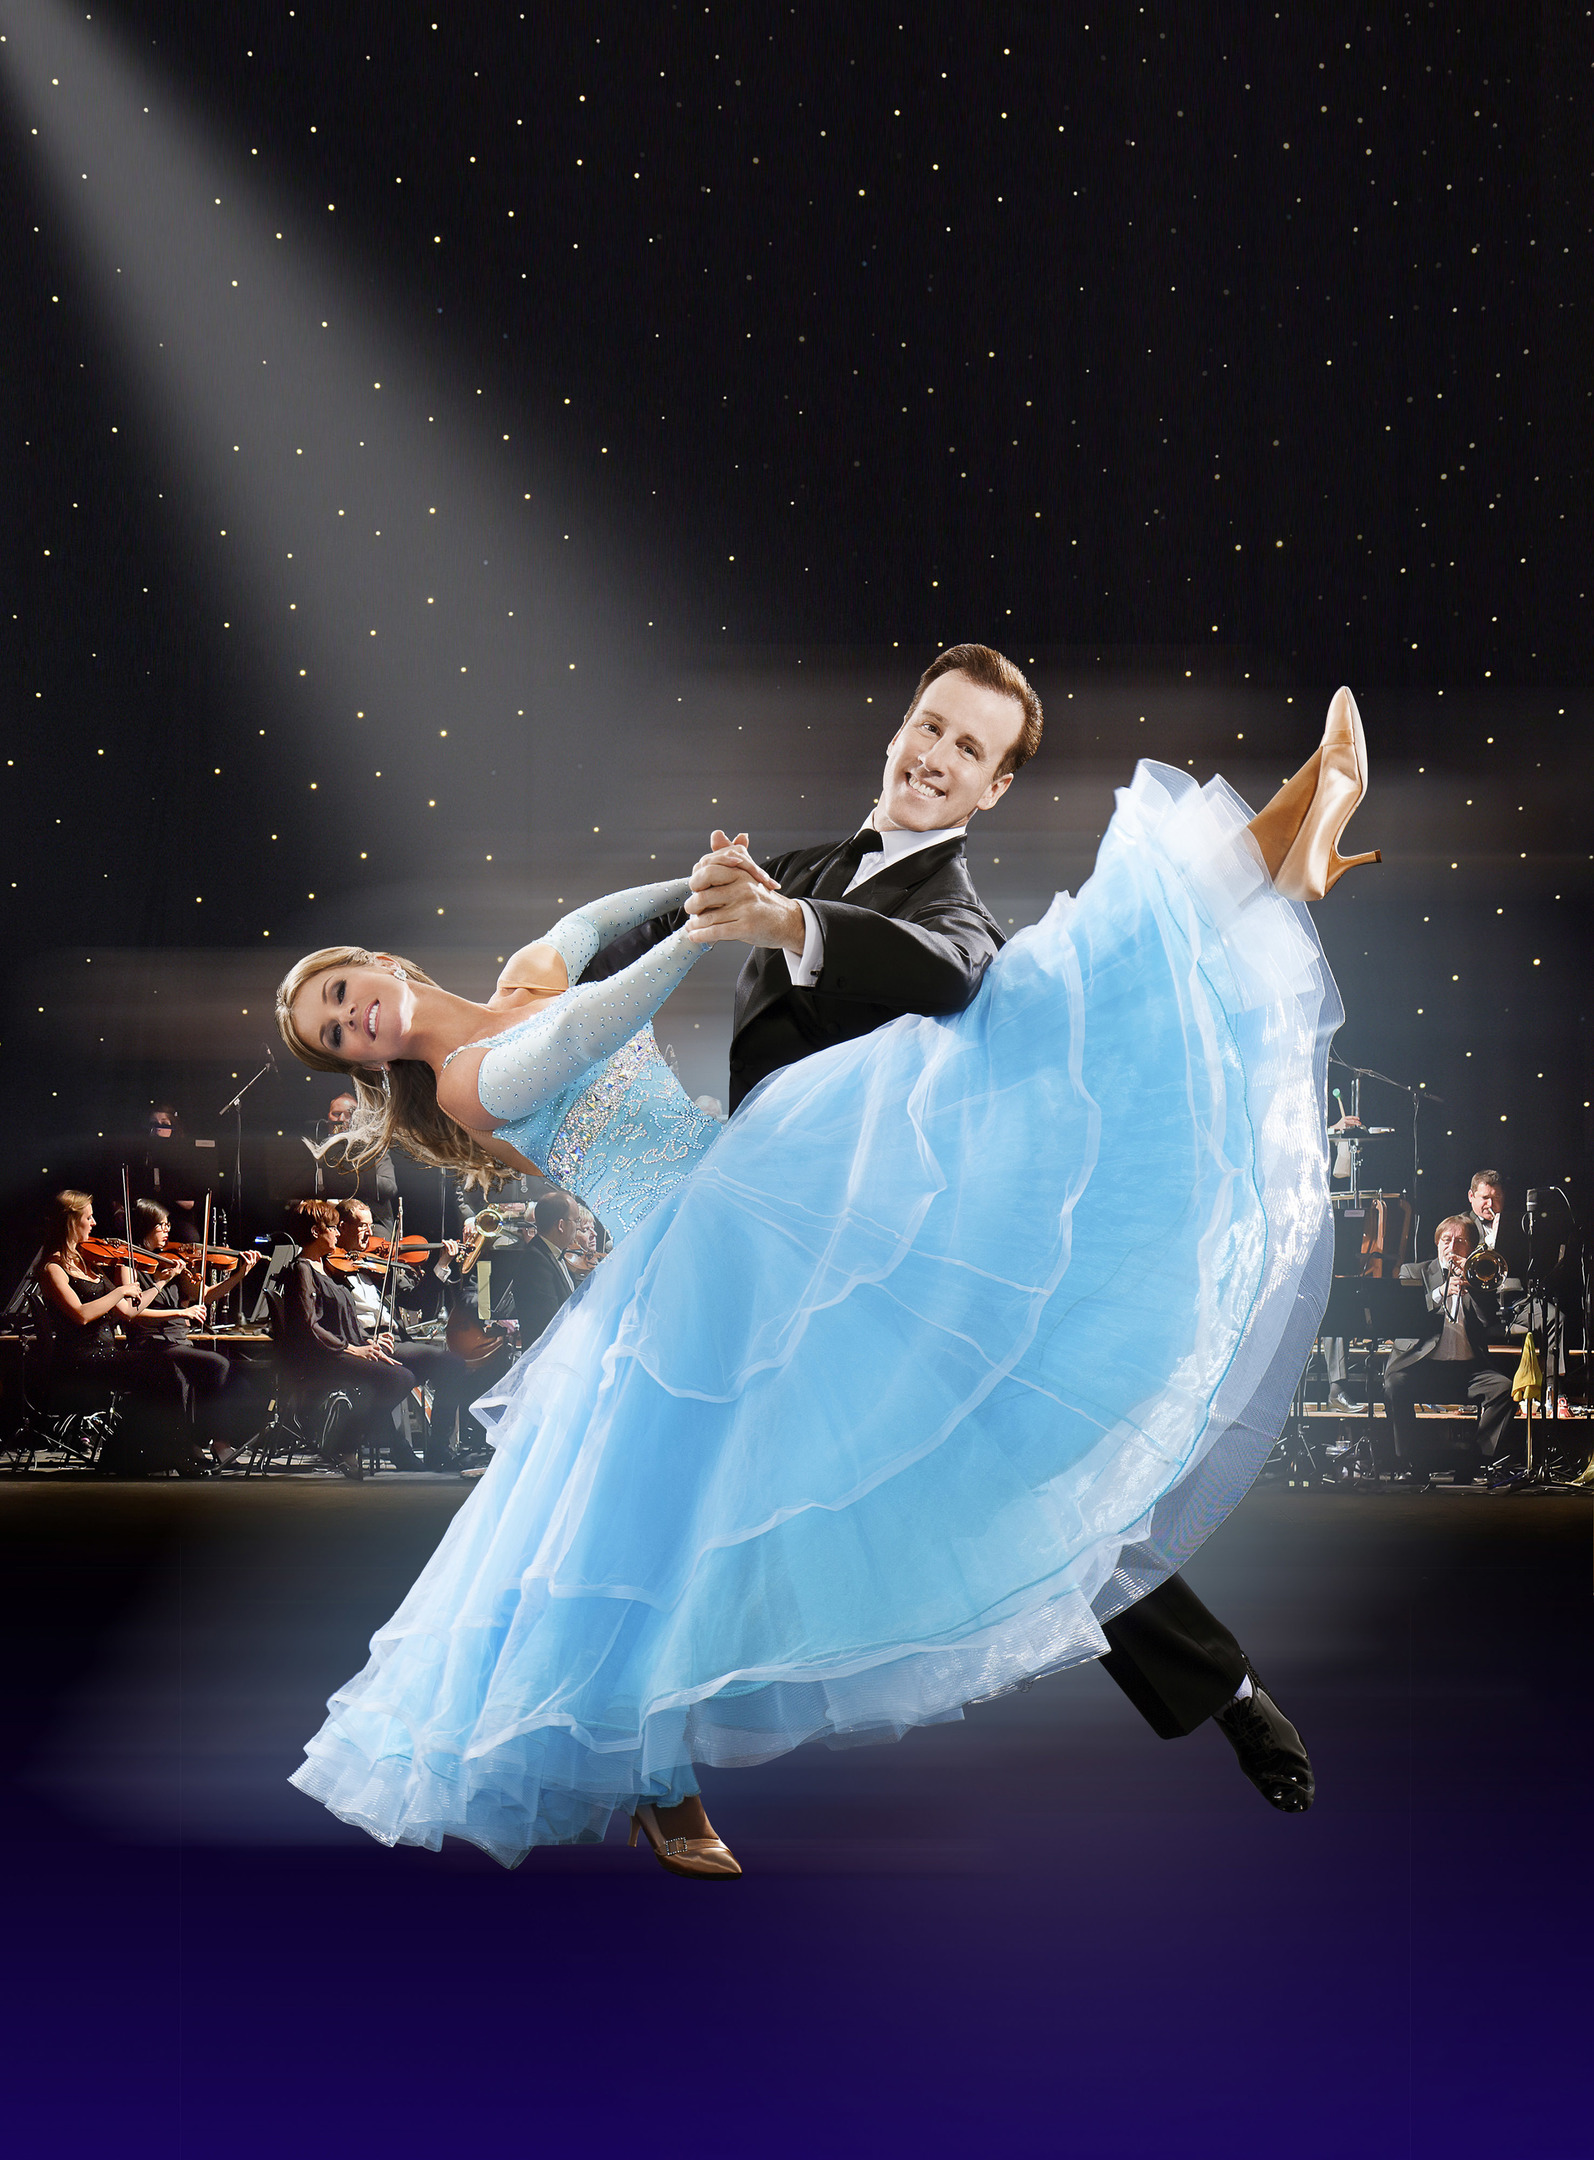 Two of the nation's favourite dancers will foxtrot, jive and rumba their way across a stage near you.